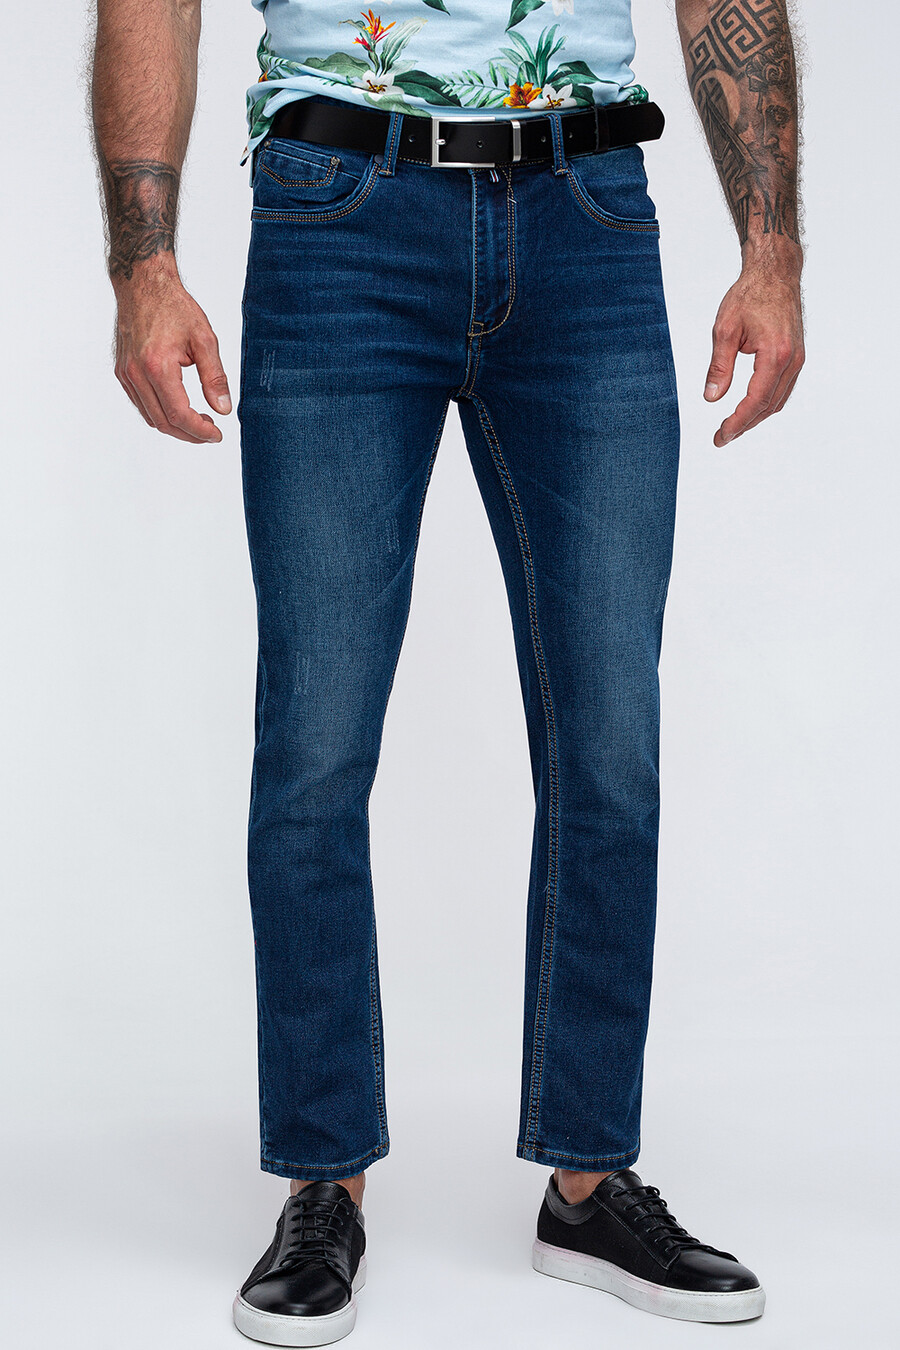 Jeans BRUNO SMGS030114